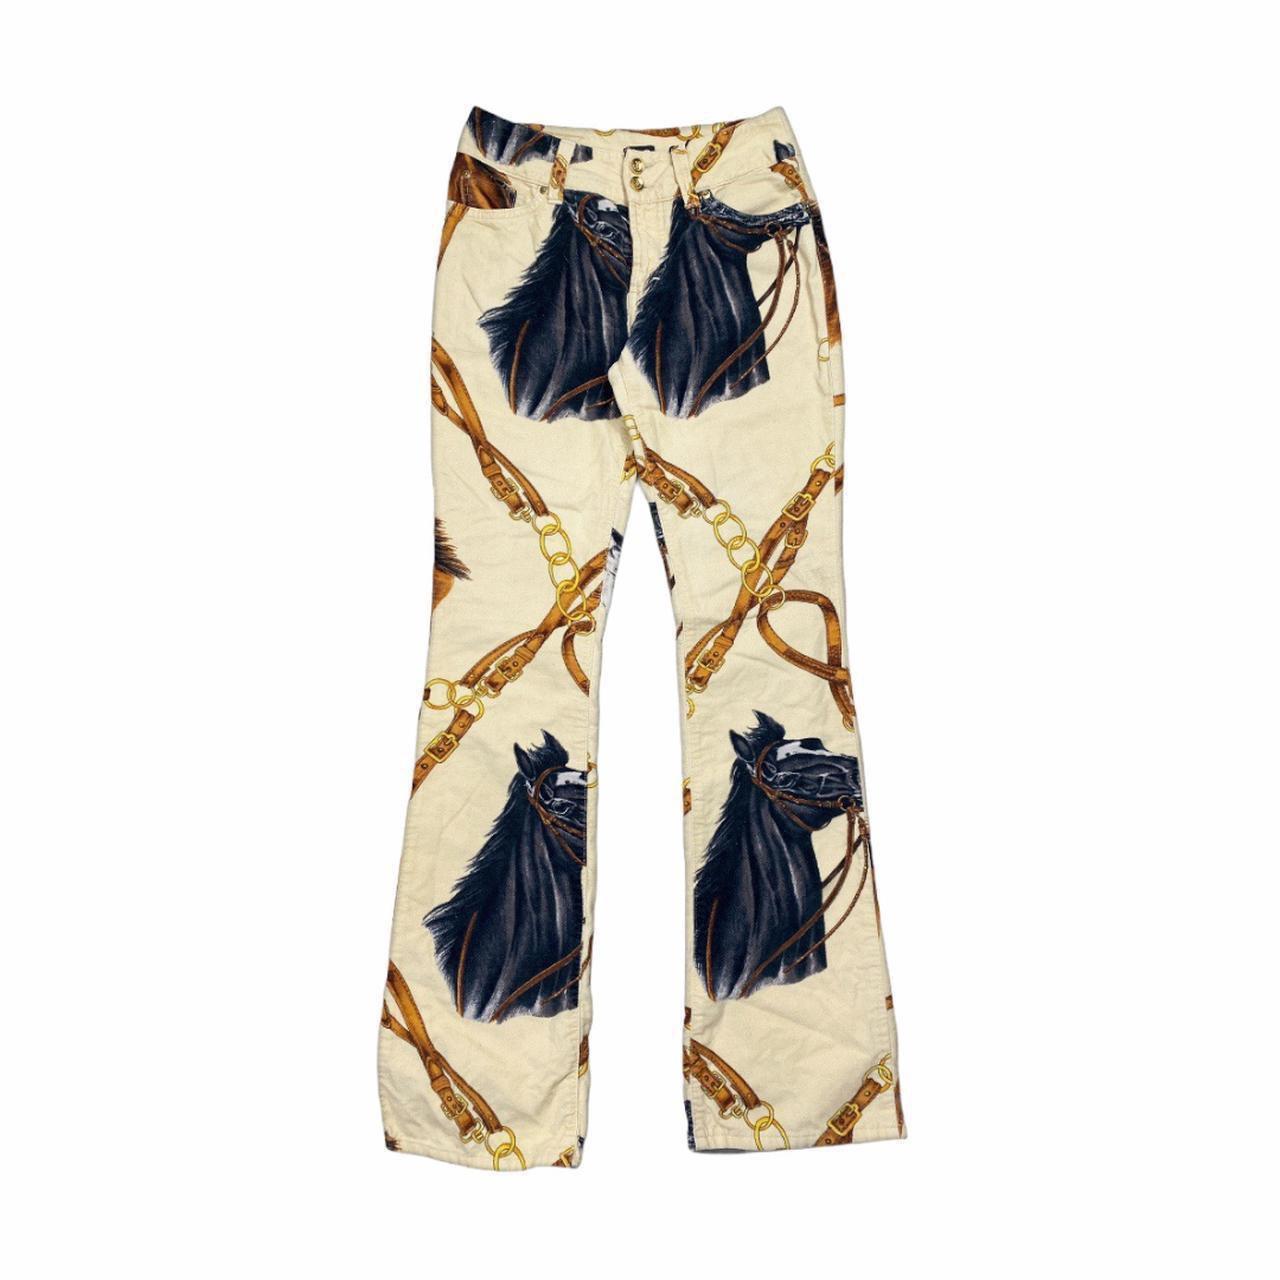 Vintage Dolce & Gabbana Trousers  Equestrian Horse Print Design In Good Condition For Sale In London, GB